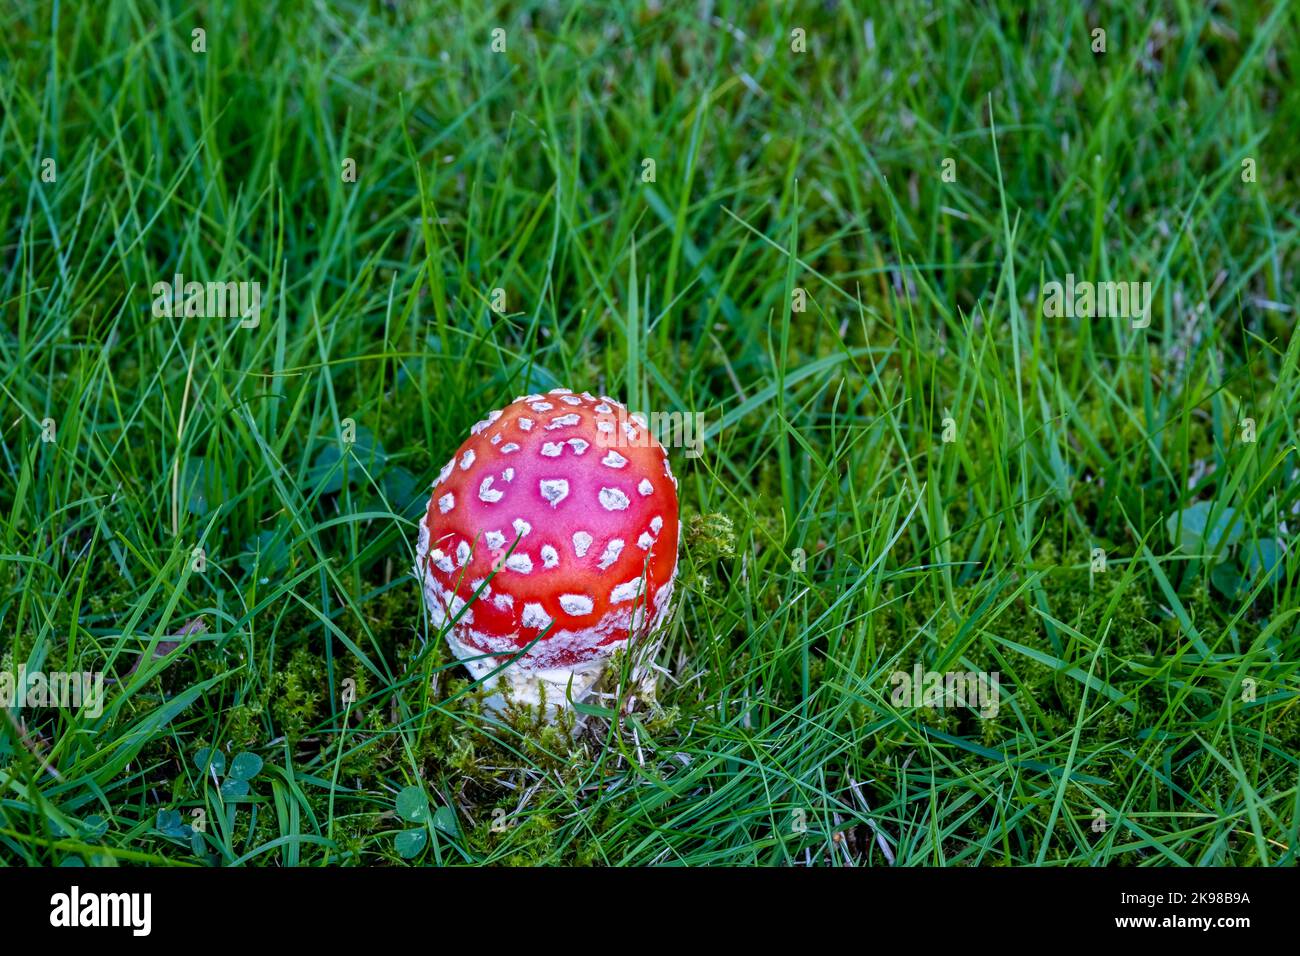 a round red toadstool on a green meadow Stock Photo